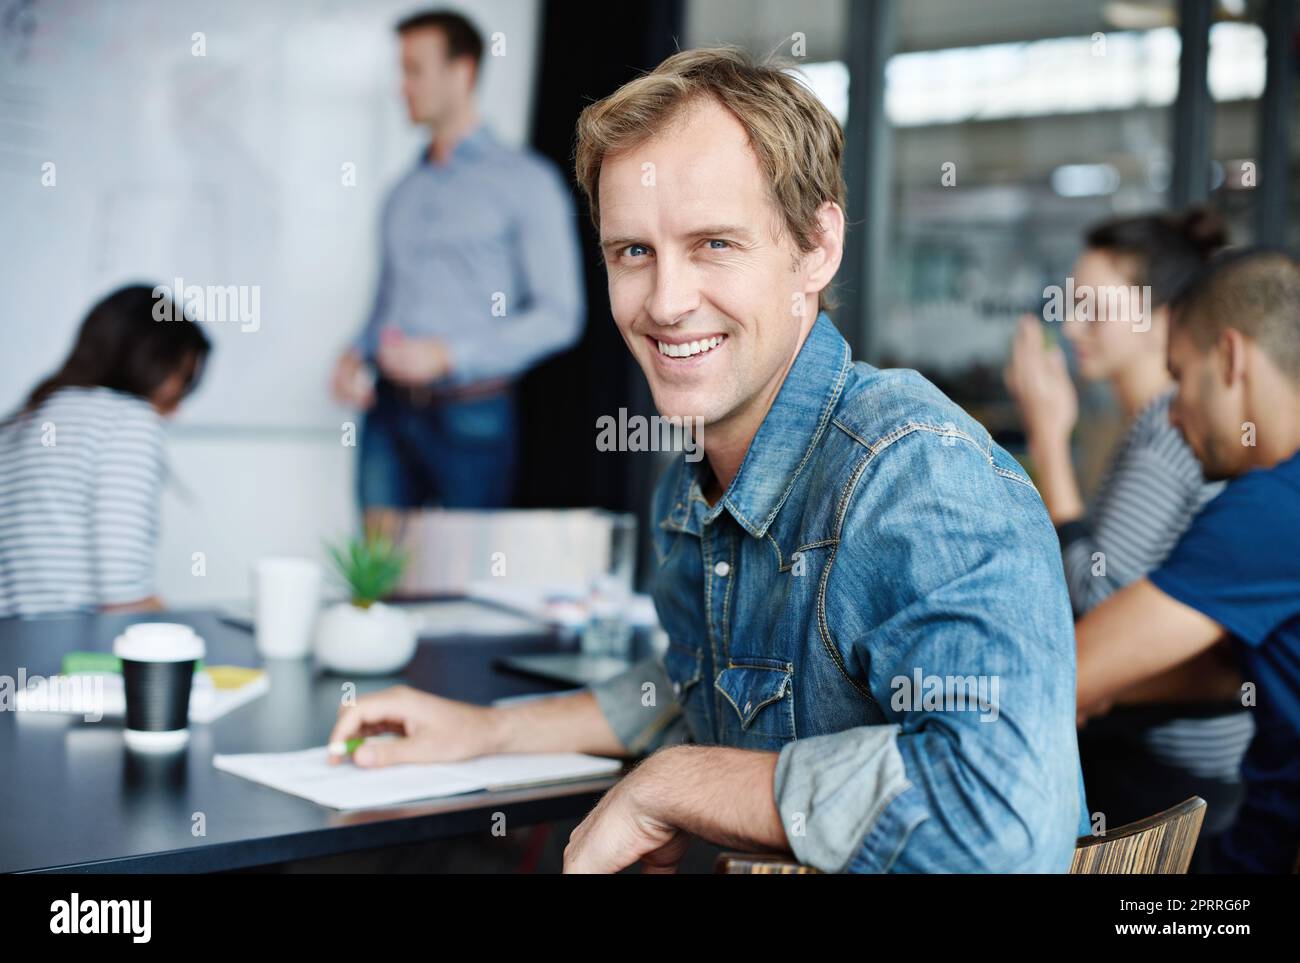 I work with the best colleagues. Portrait of an office worker with his colleagues sitting in the background. Stock Photo